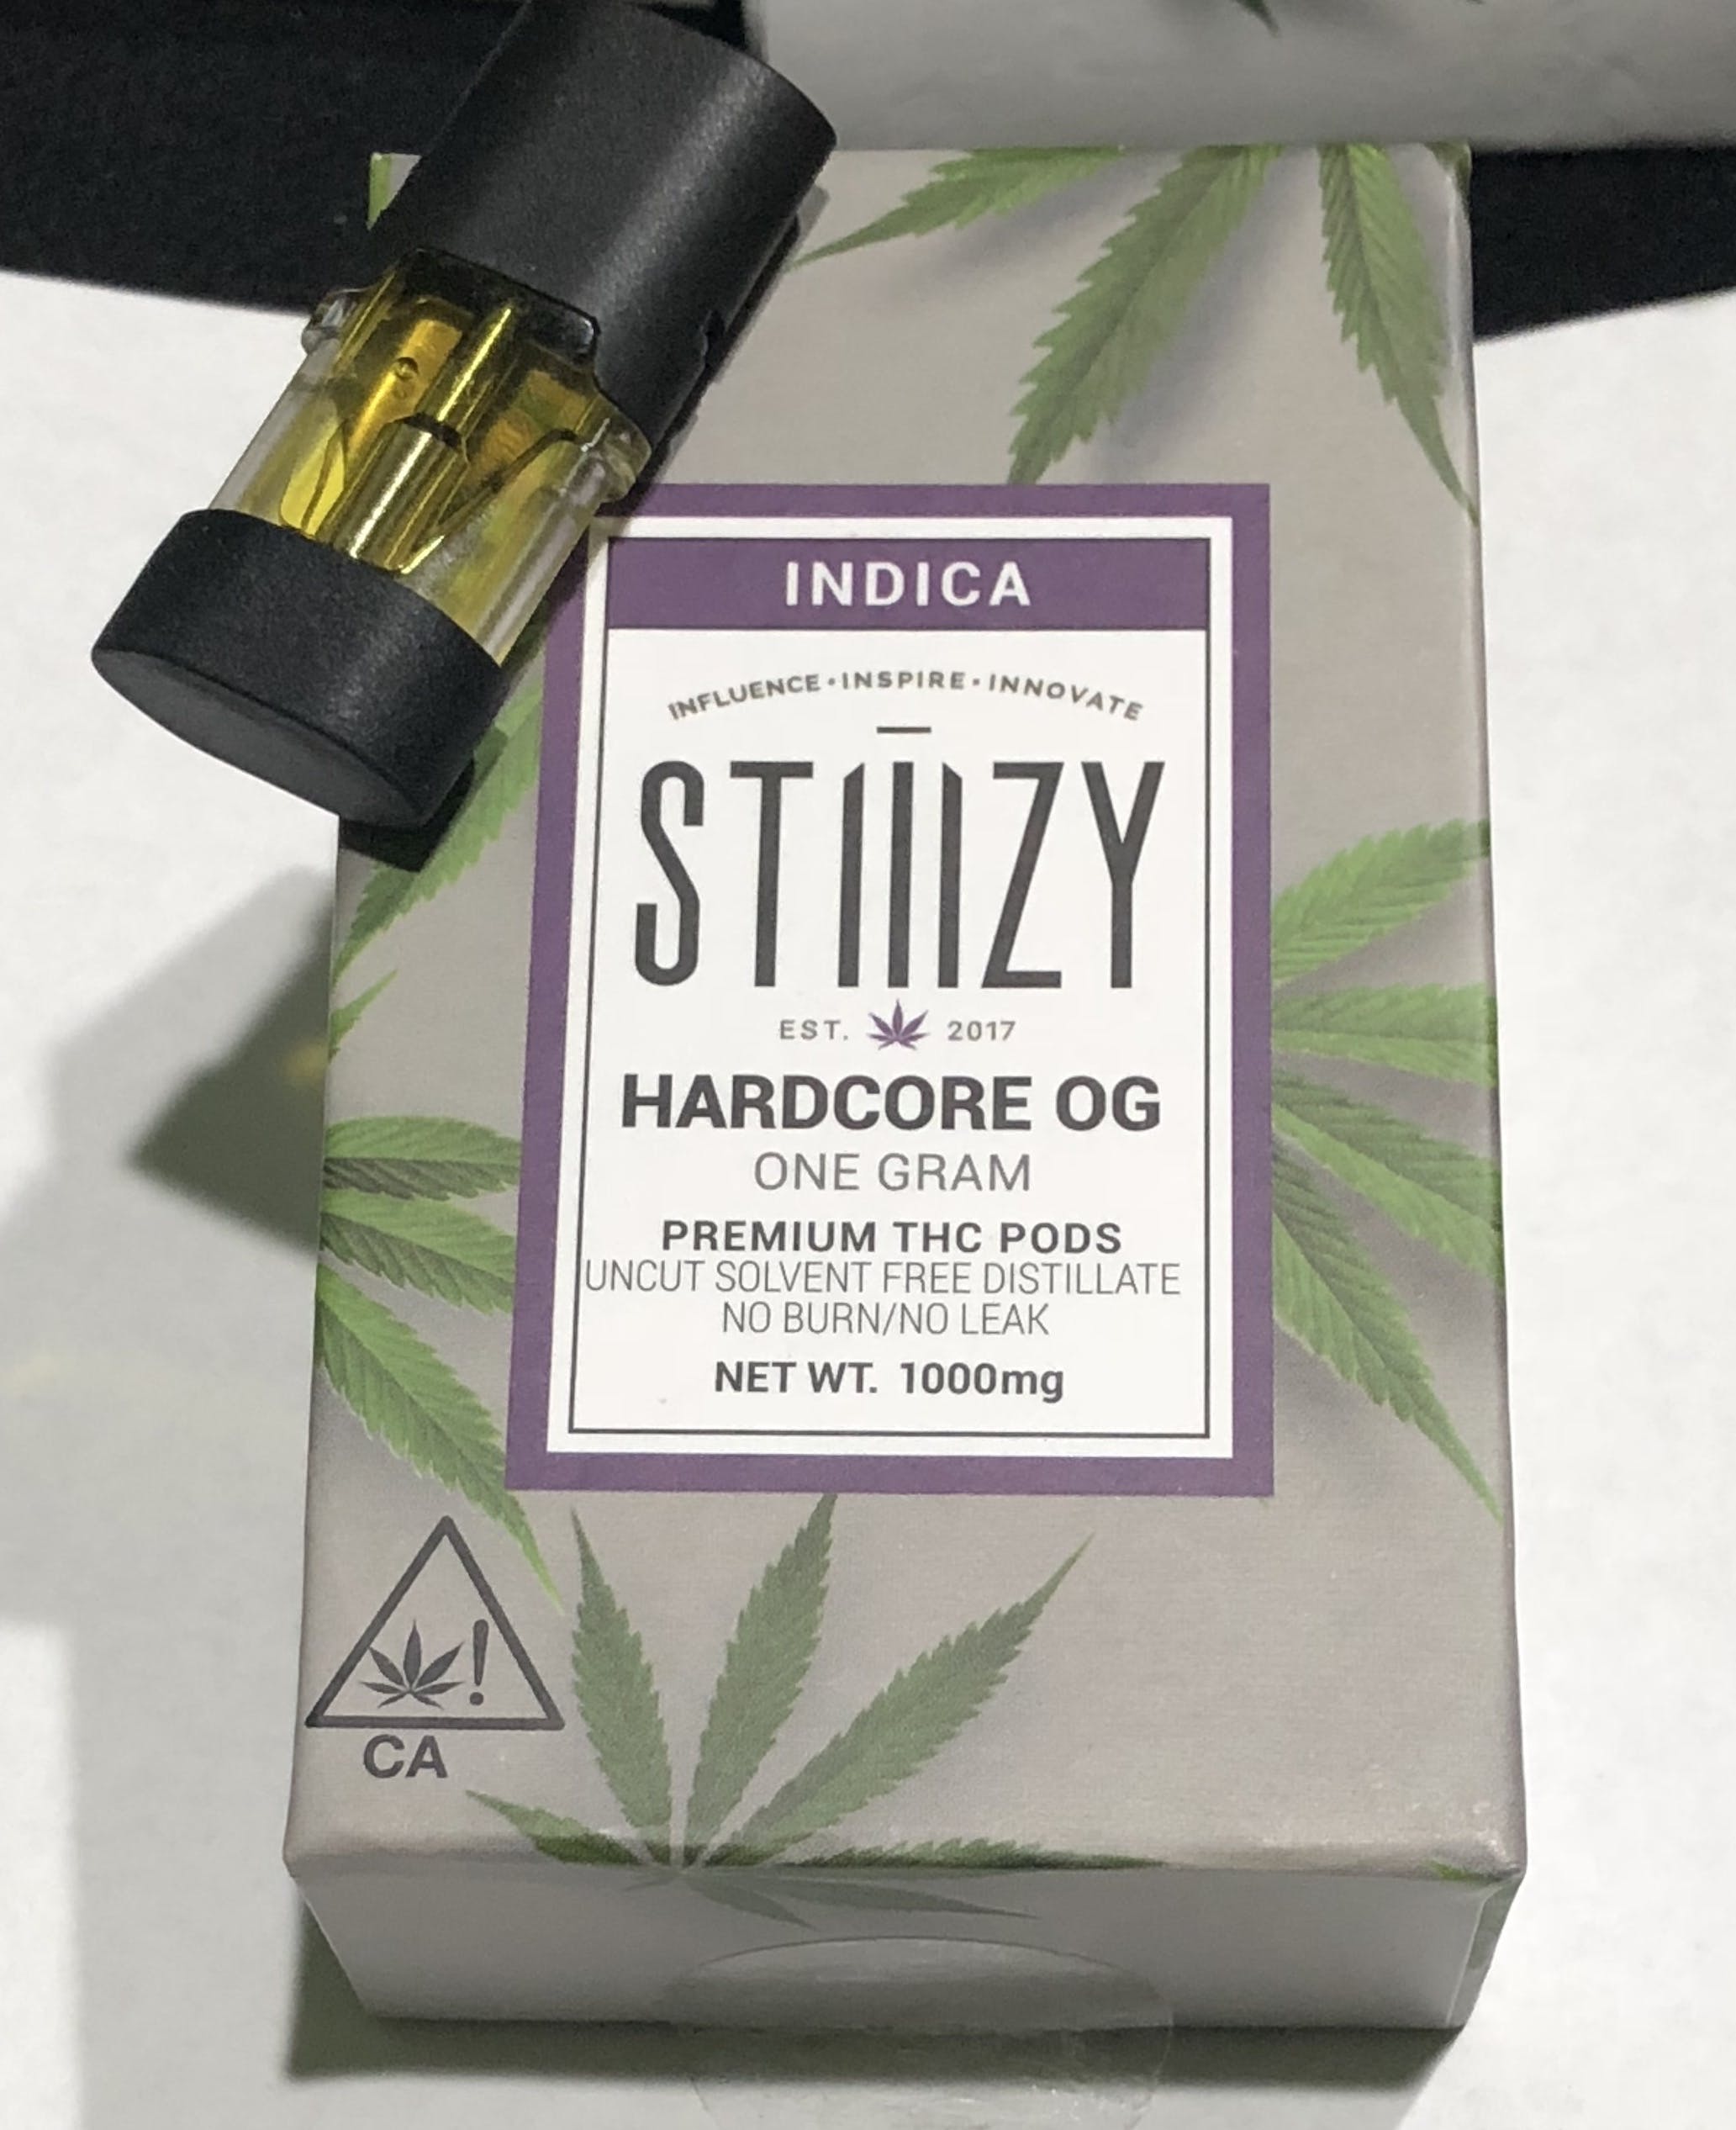 concentrate-stiiizy-1g-cartridge-2for-2495